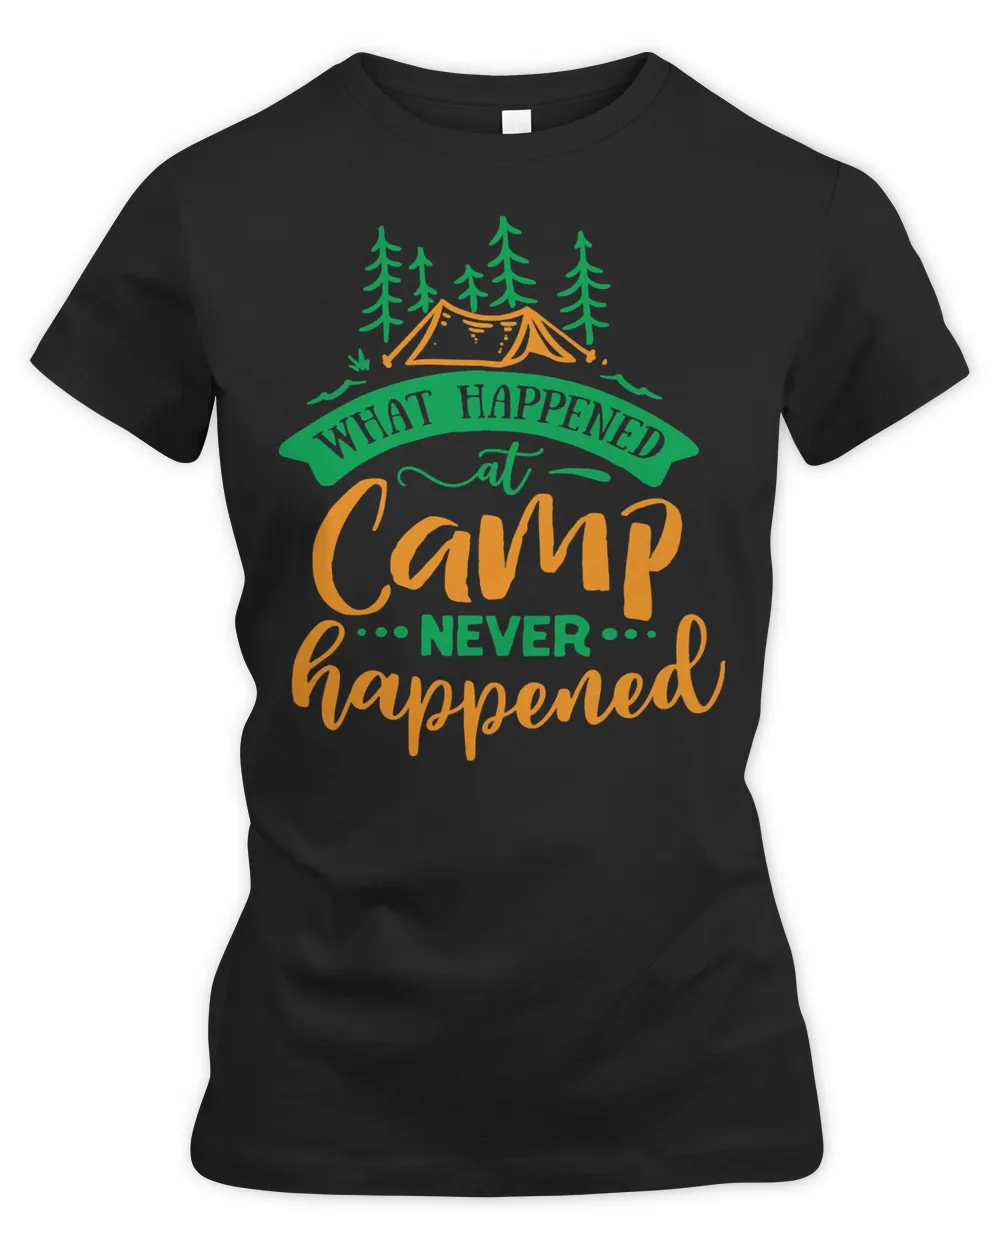 Camping Travel What happened at camp never happened 748 Camp camper